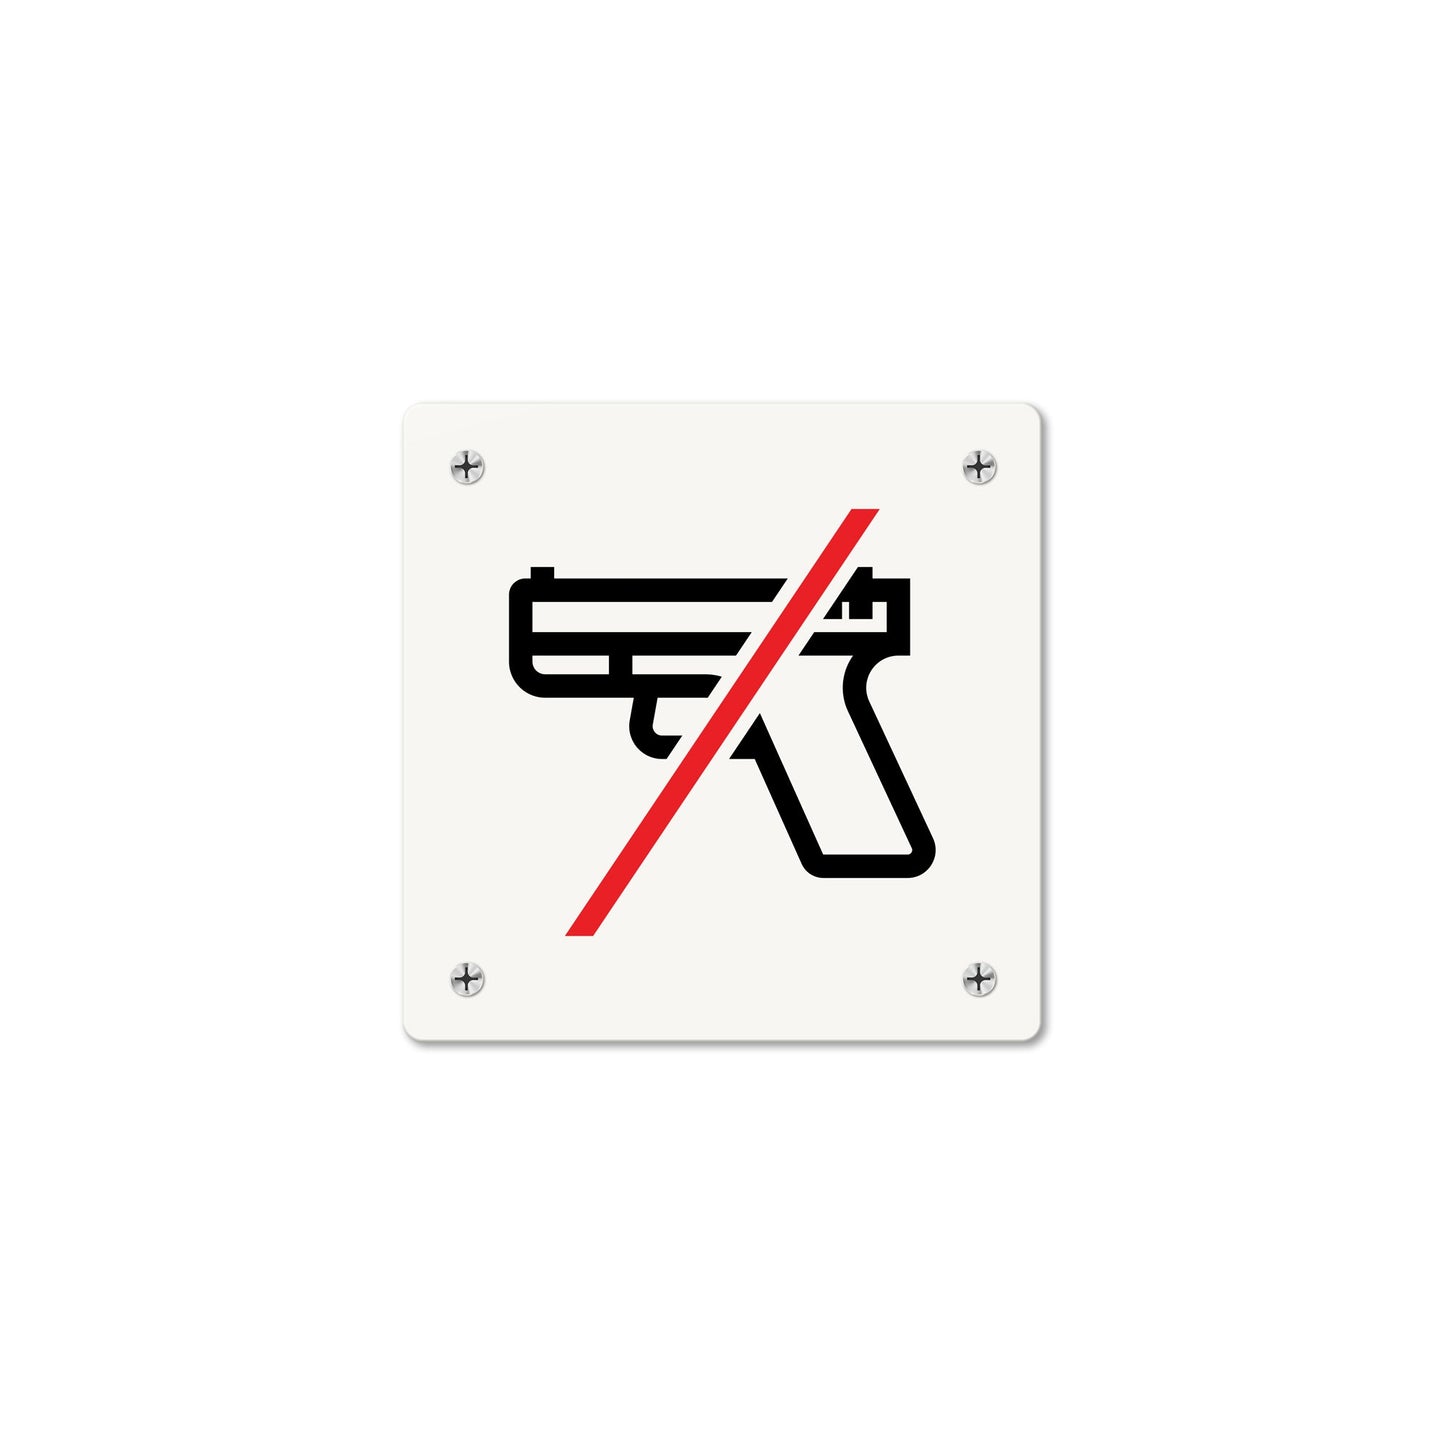 No Firearms Allowed (Pictogram)